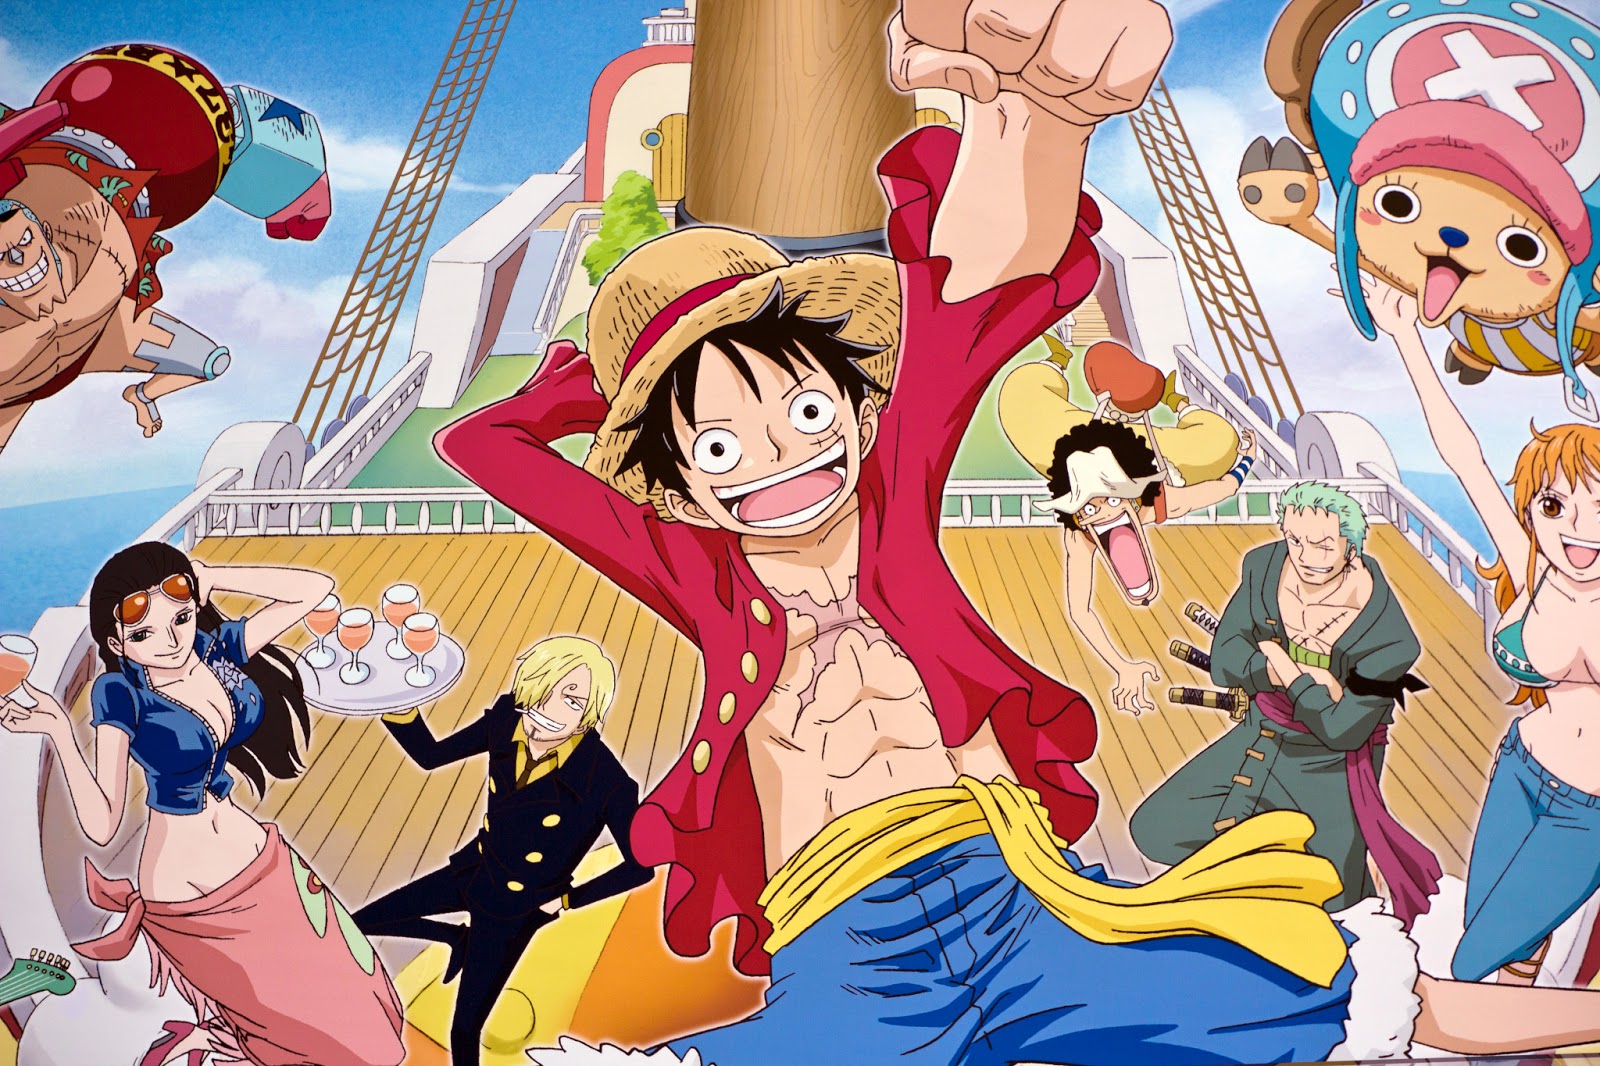  one piece wallpaper backgrounds   Cool Anime Wallpaper Backgrounds 1600x1066